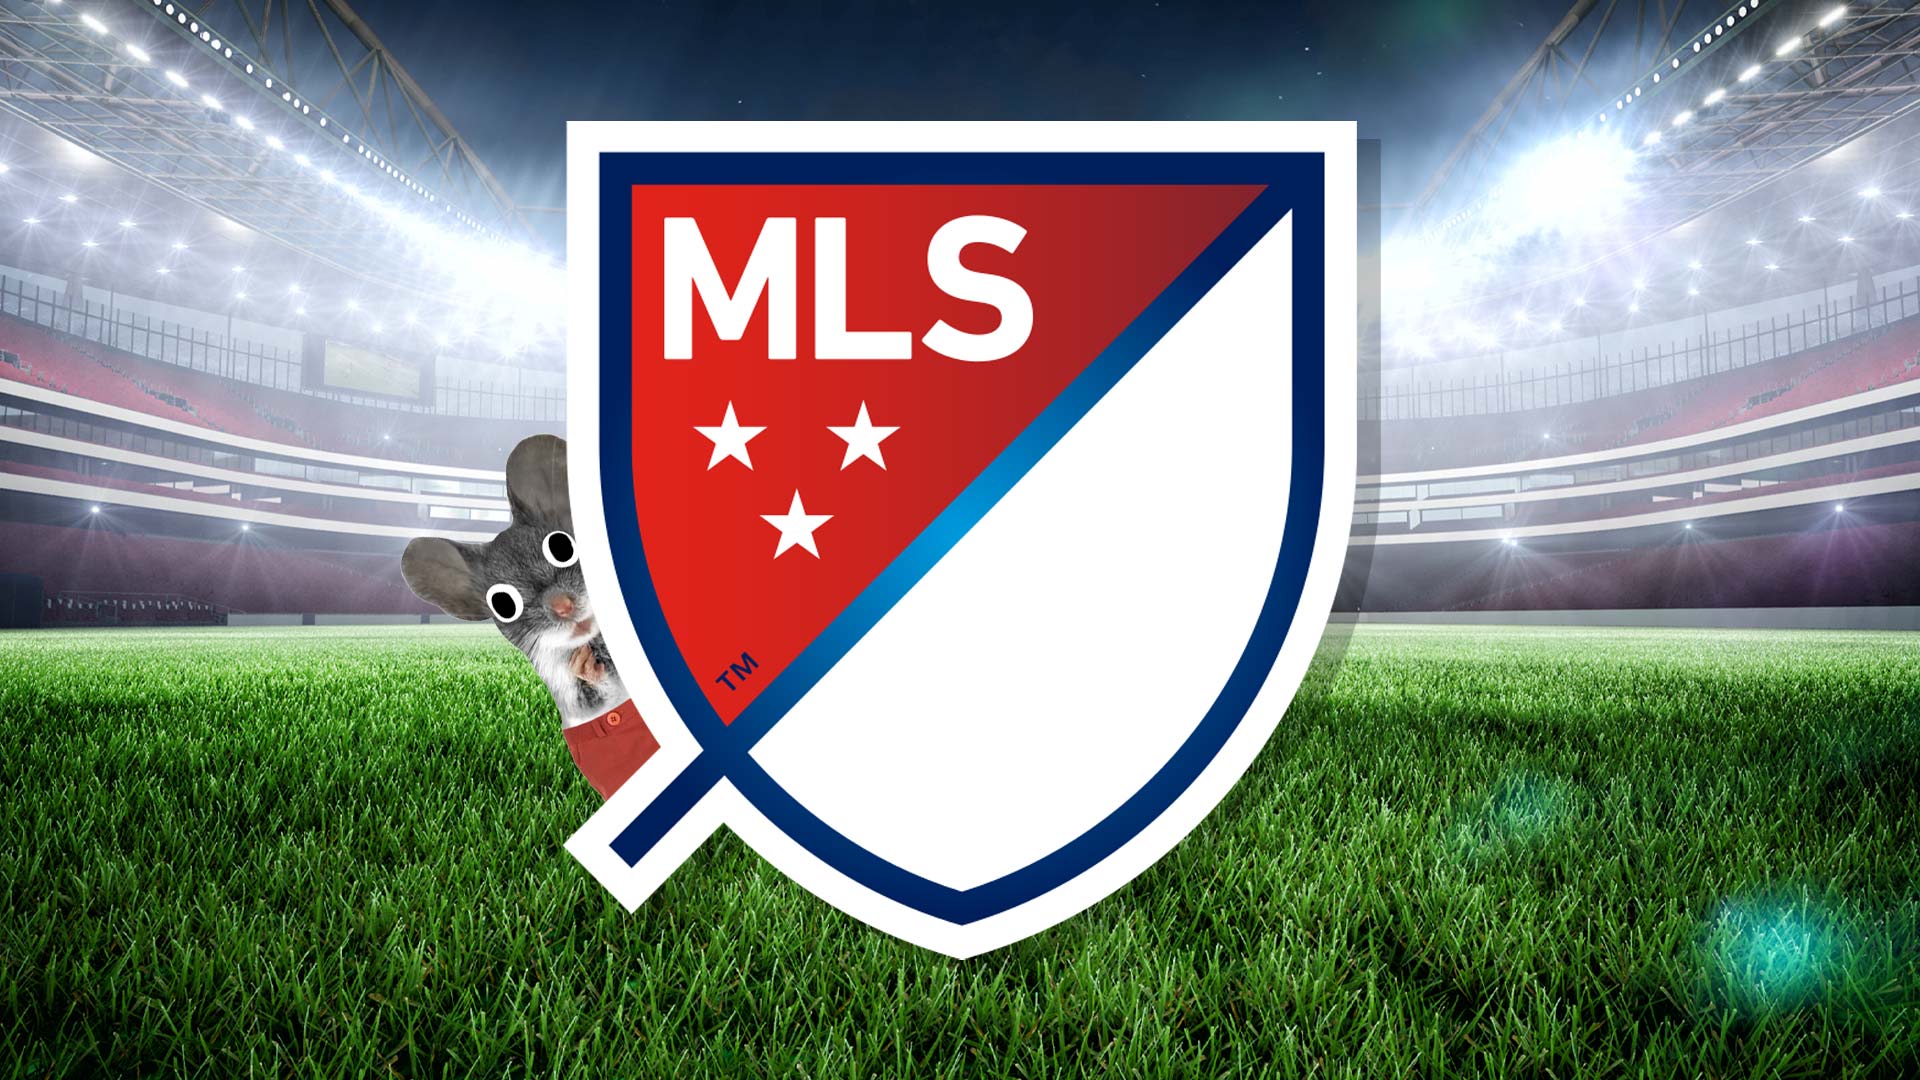 The MLS badge and Mickey Mouse